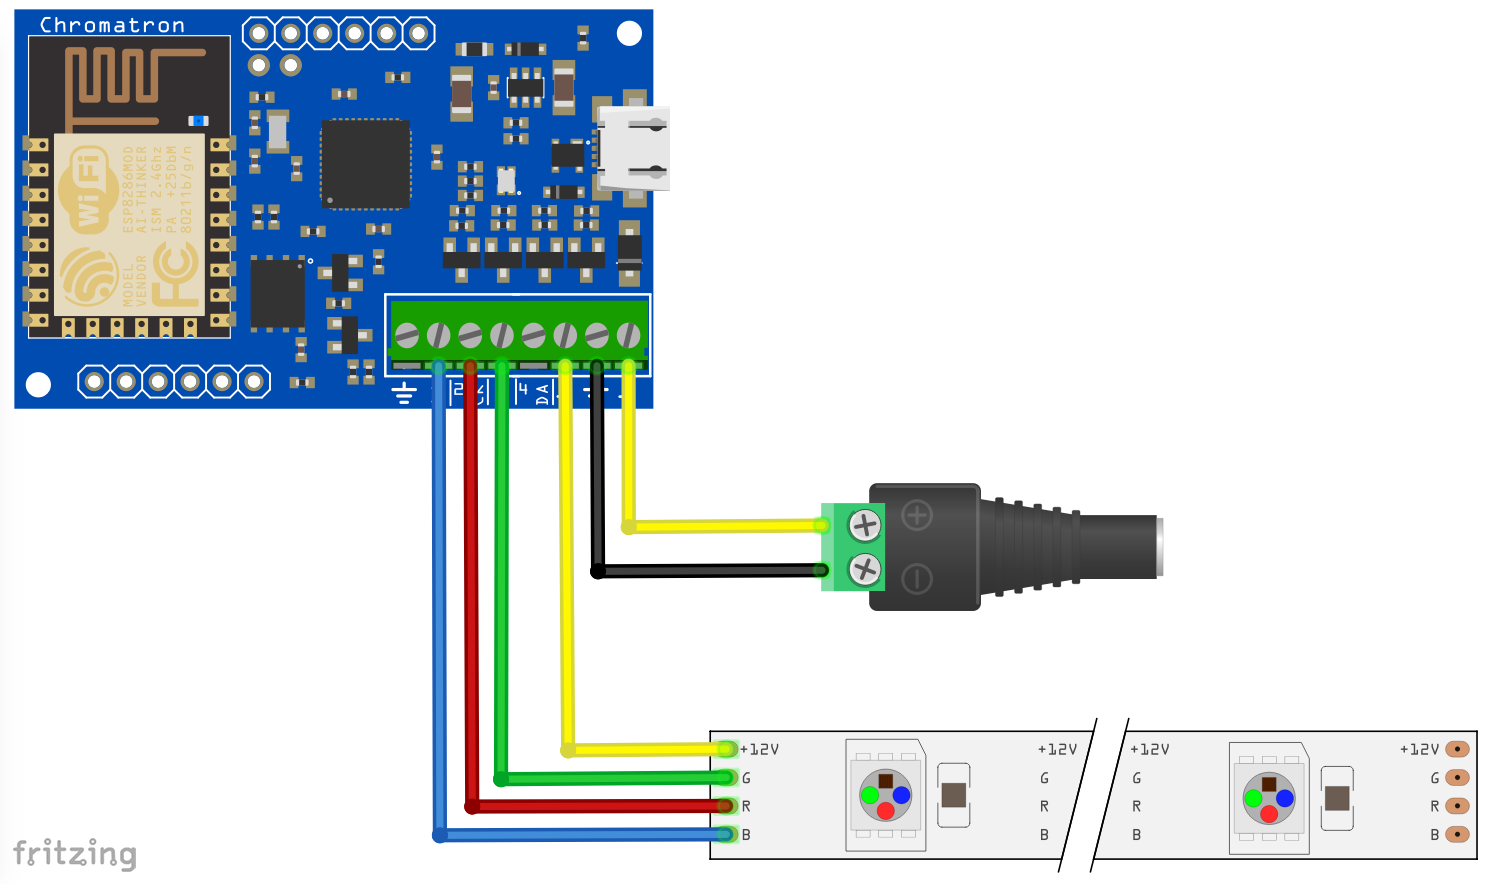 _images/chromatron_led_pwm_connections_bb.png